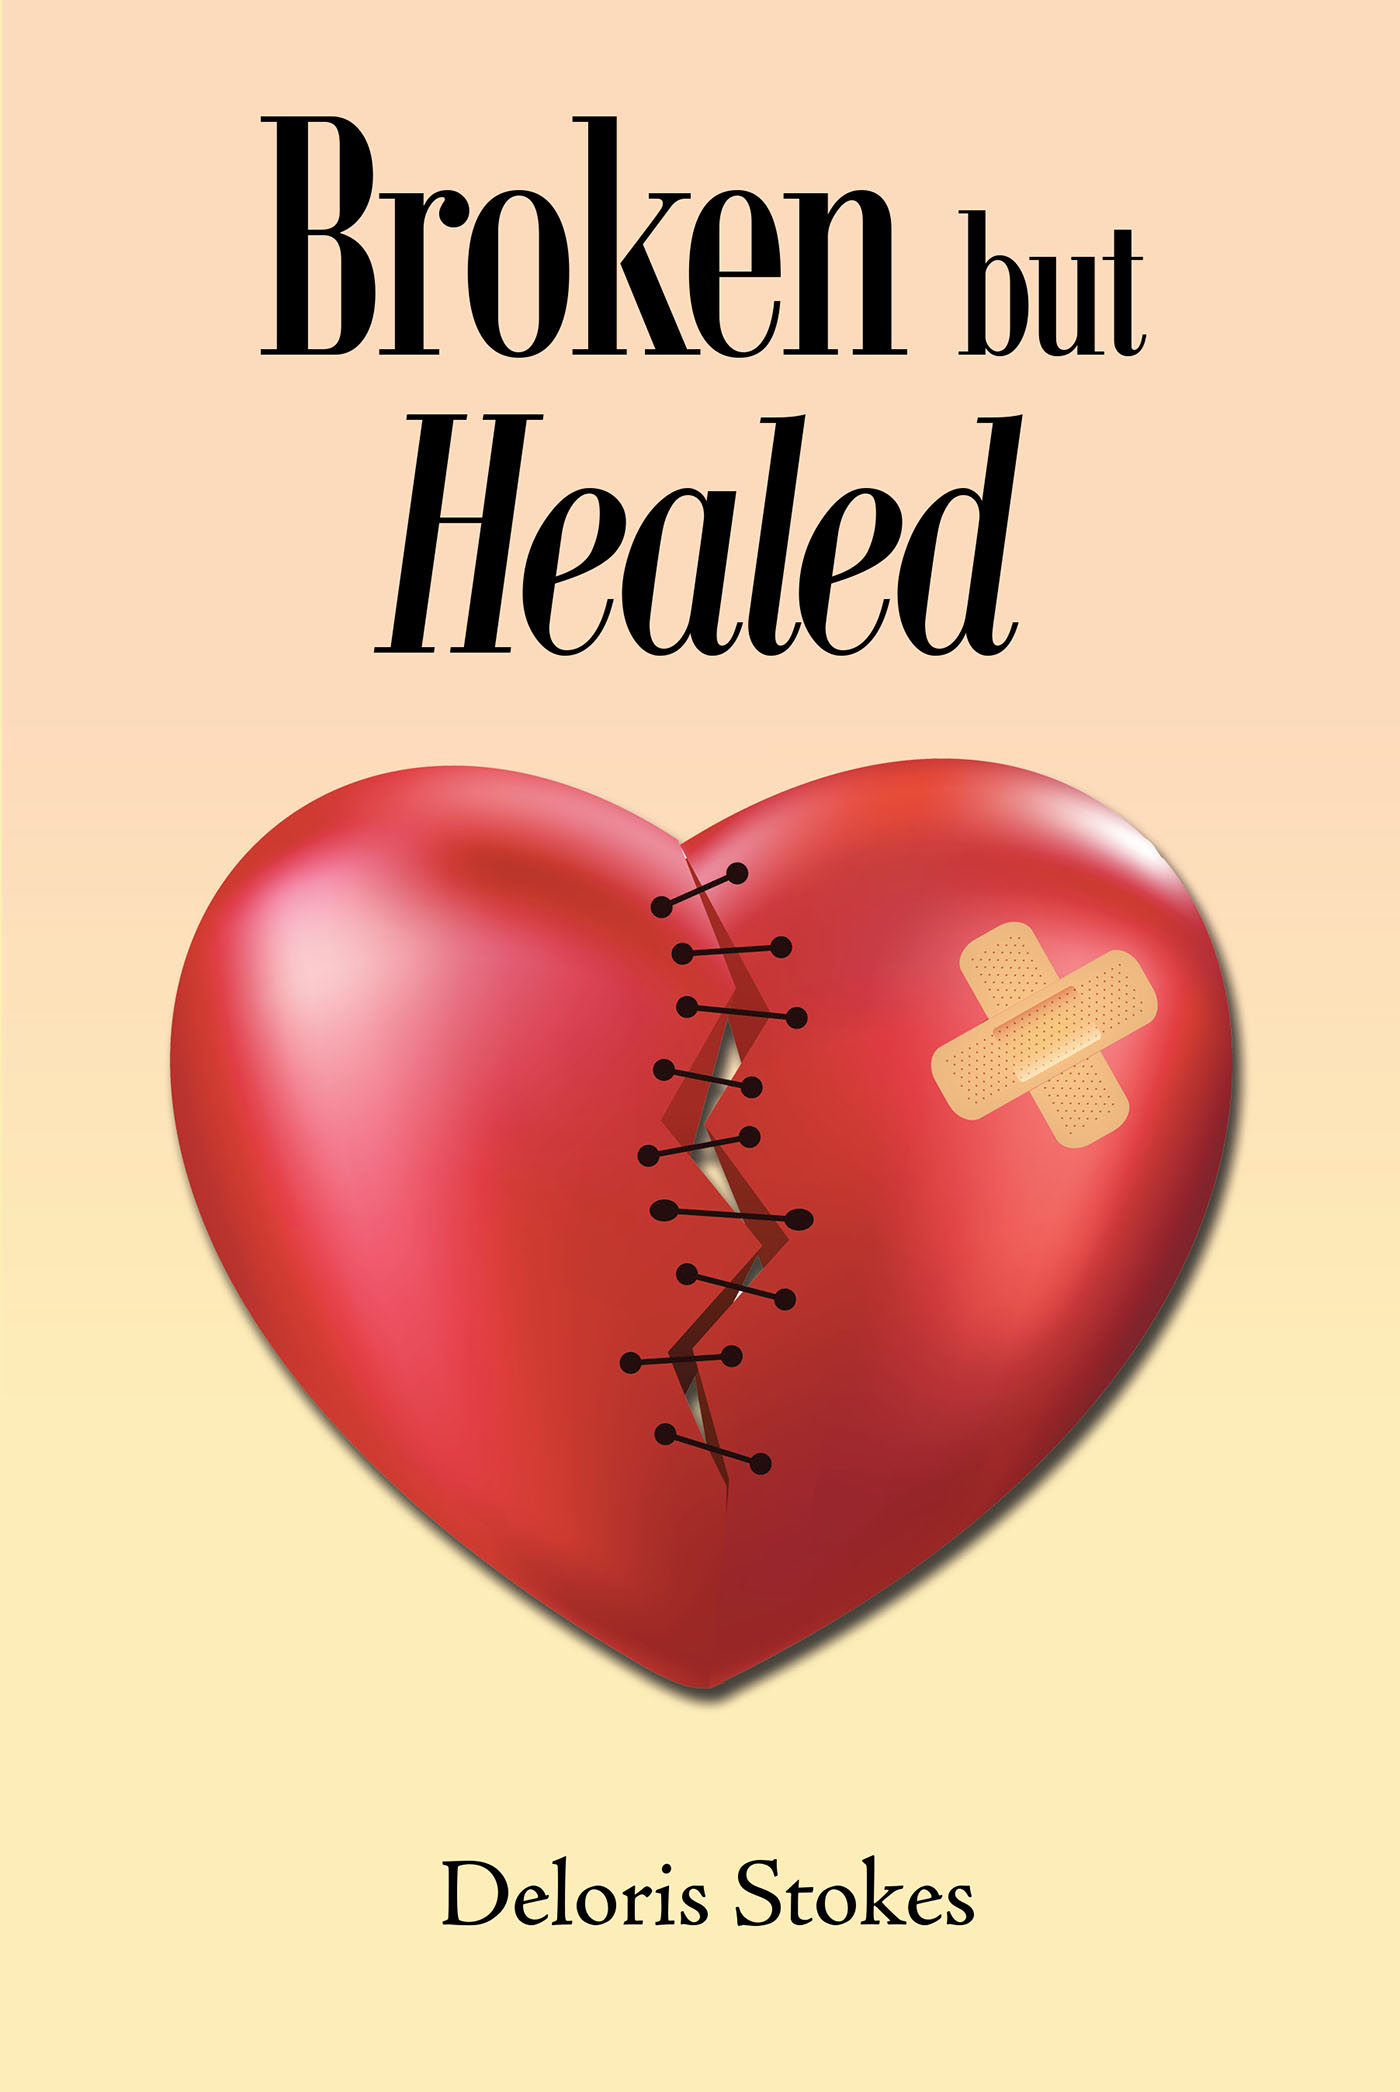 Deloris Stokes’s newly released, “Broken but Healed,” is a poignant story of betrayal, abuse, and finding strength in Christ